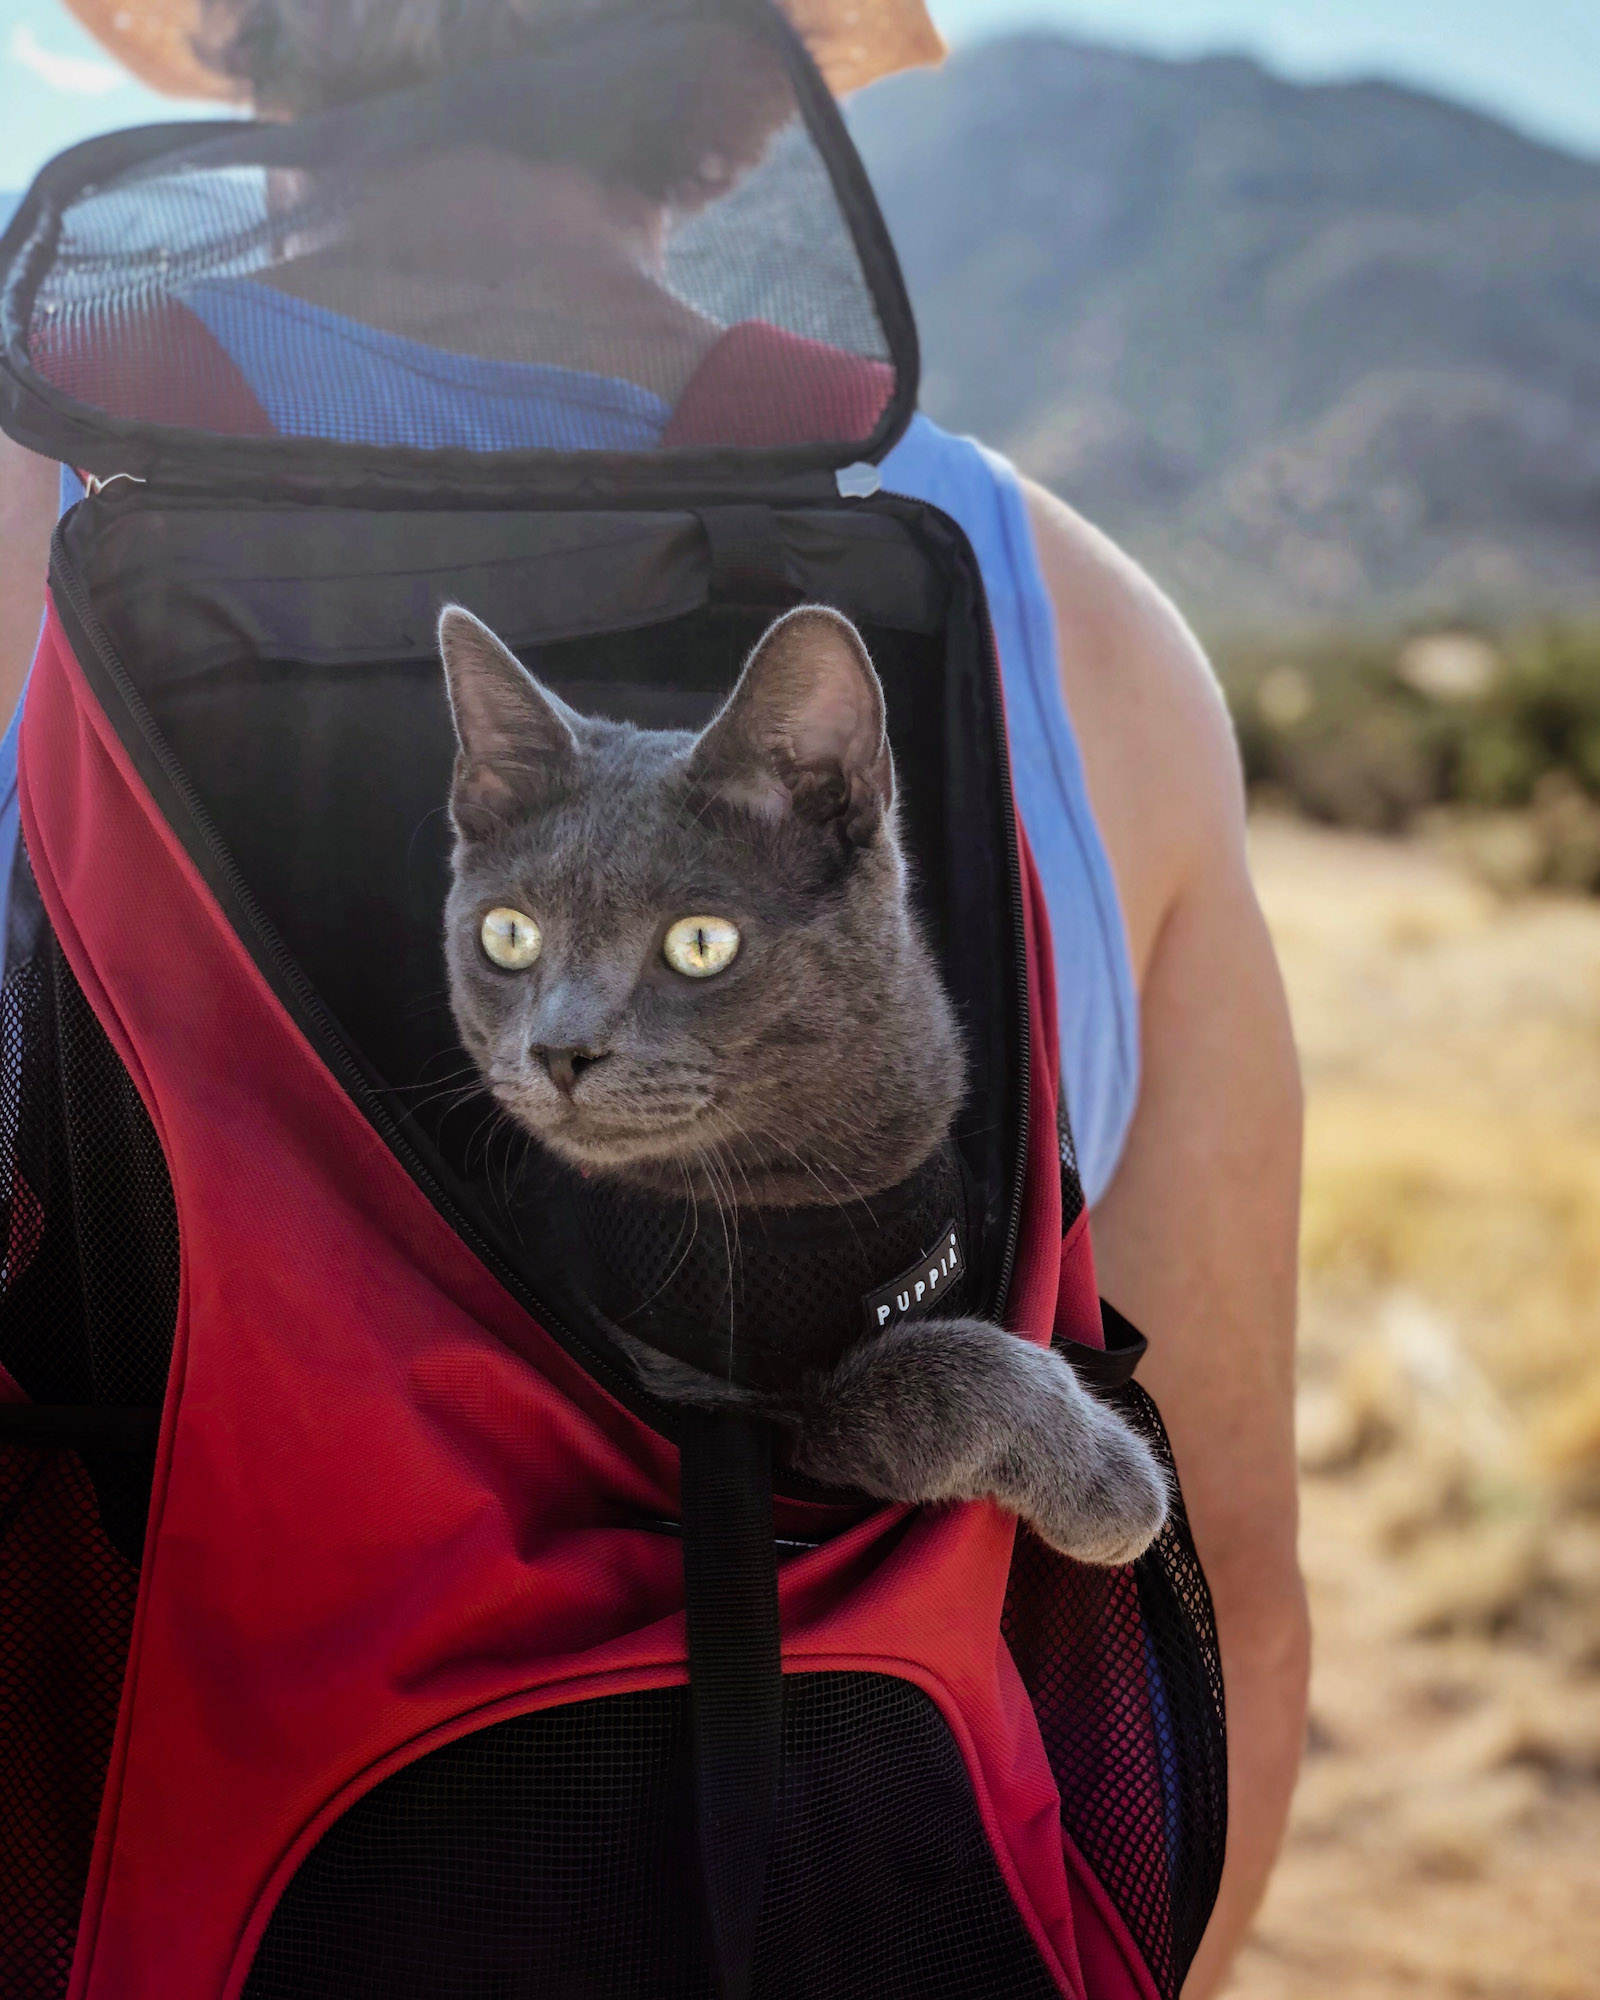 Walt the cat watches world from his backpack